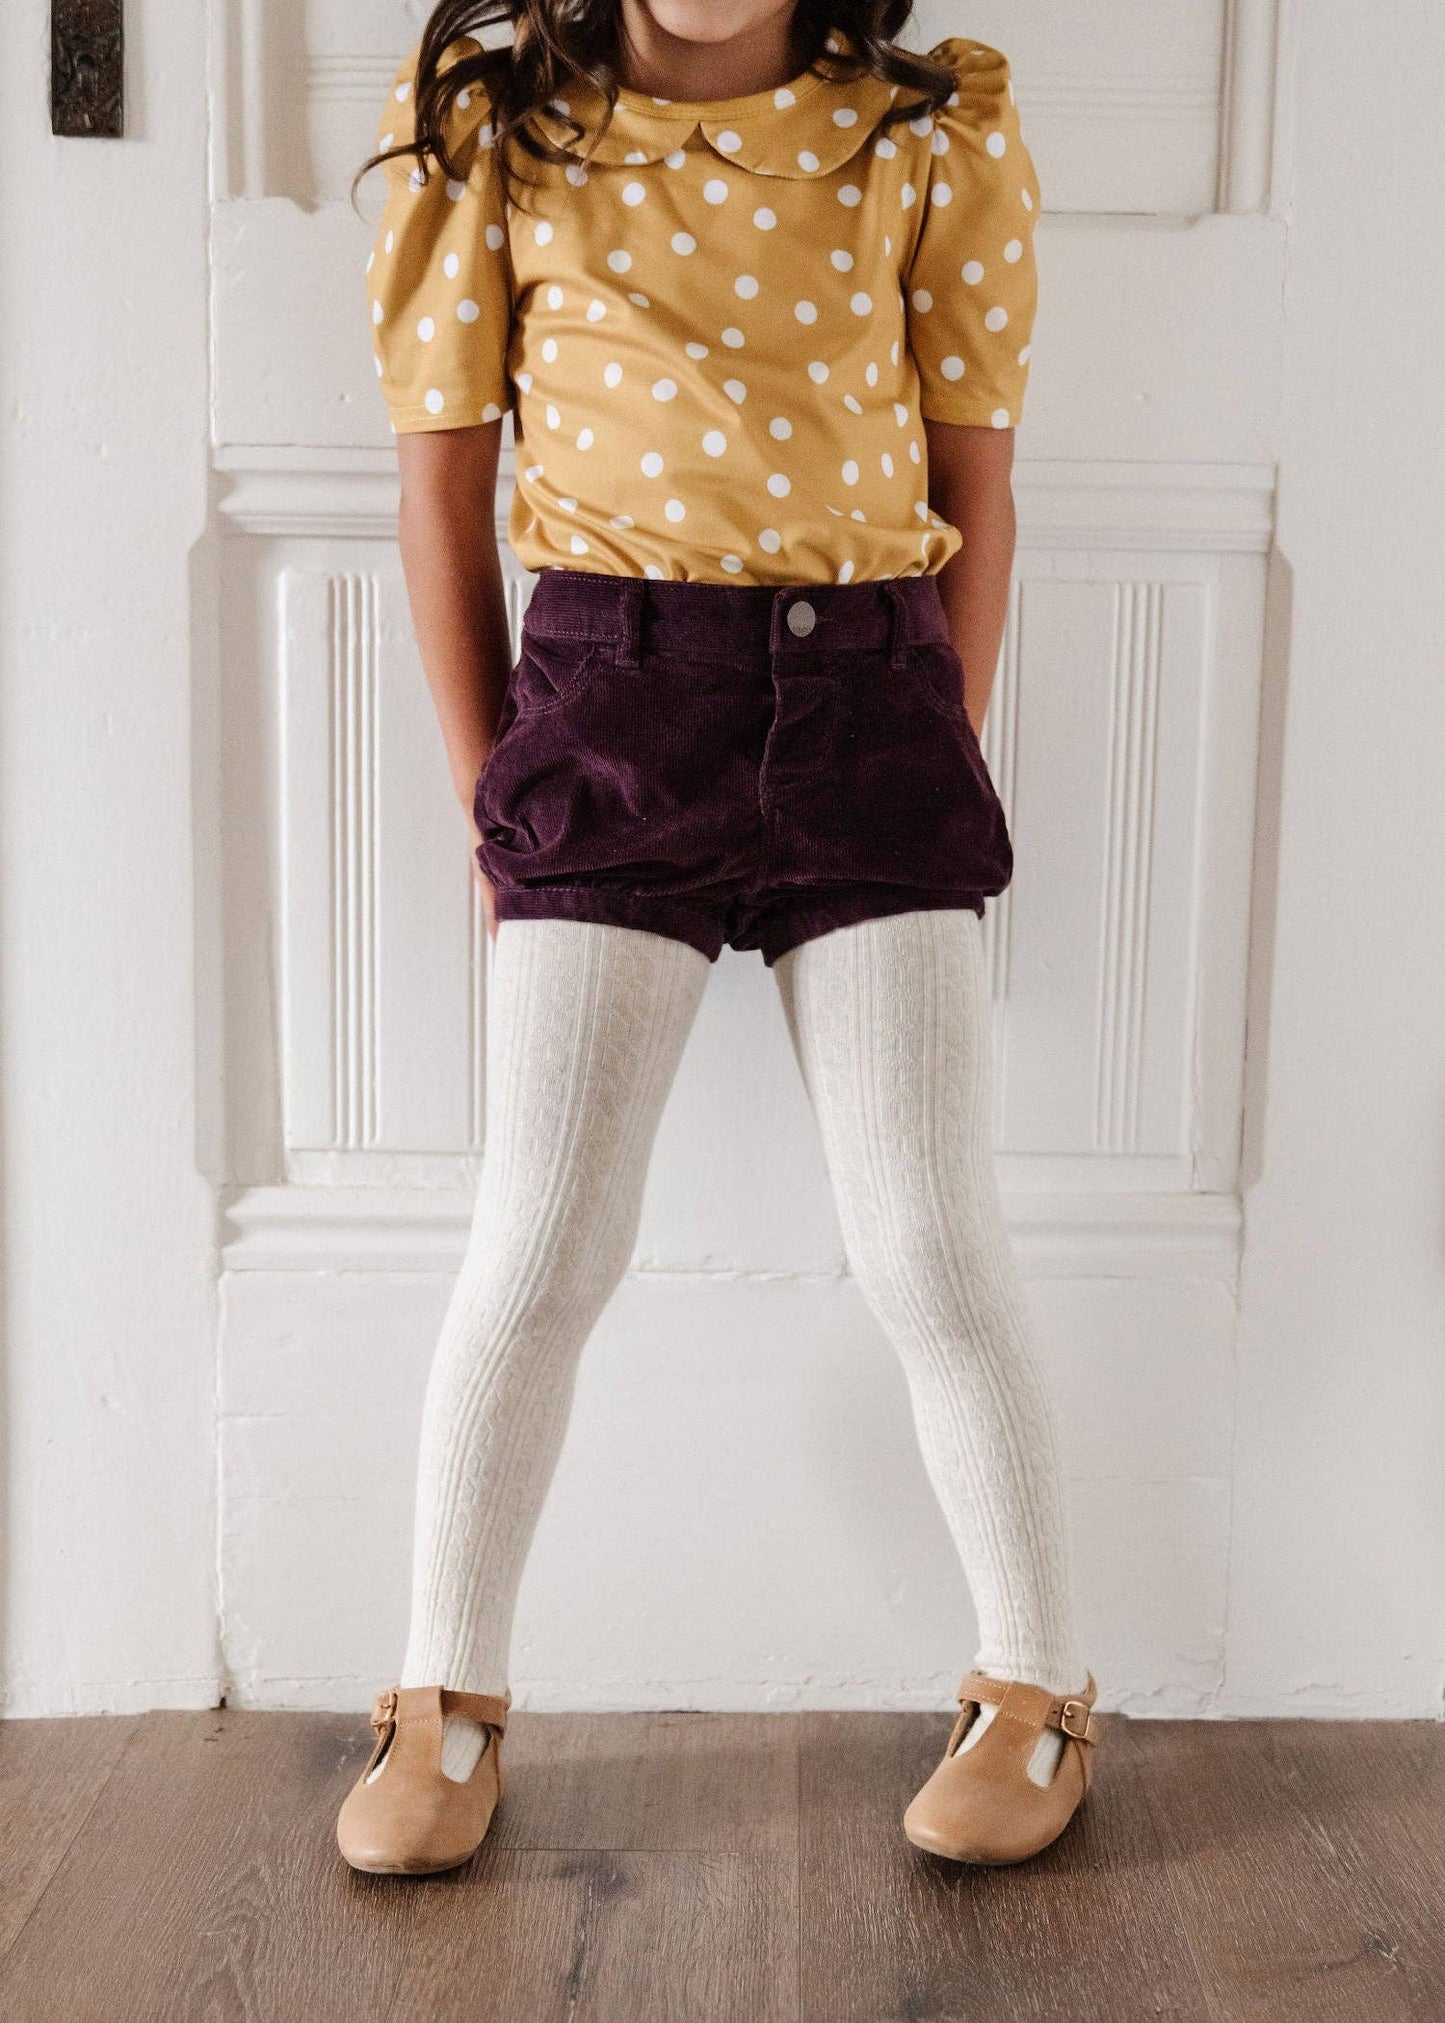 Little Stocking Co. - Heathered Ivory Cable Knit Tights: 6-12 MONTHS